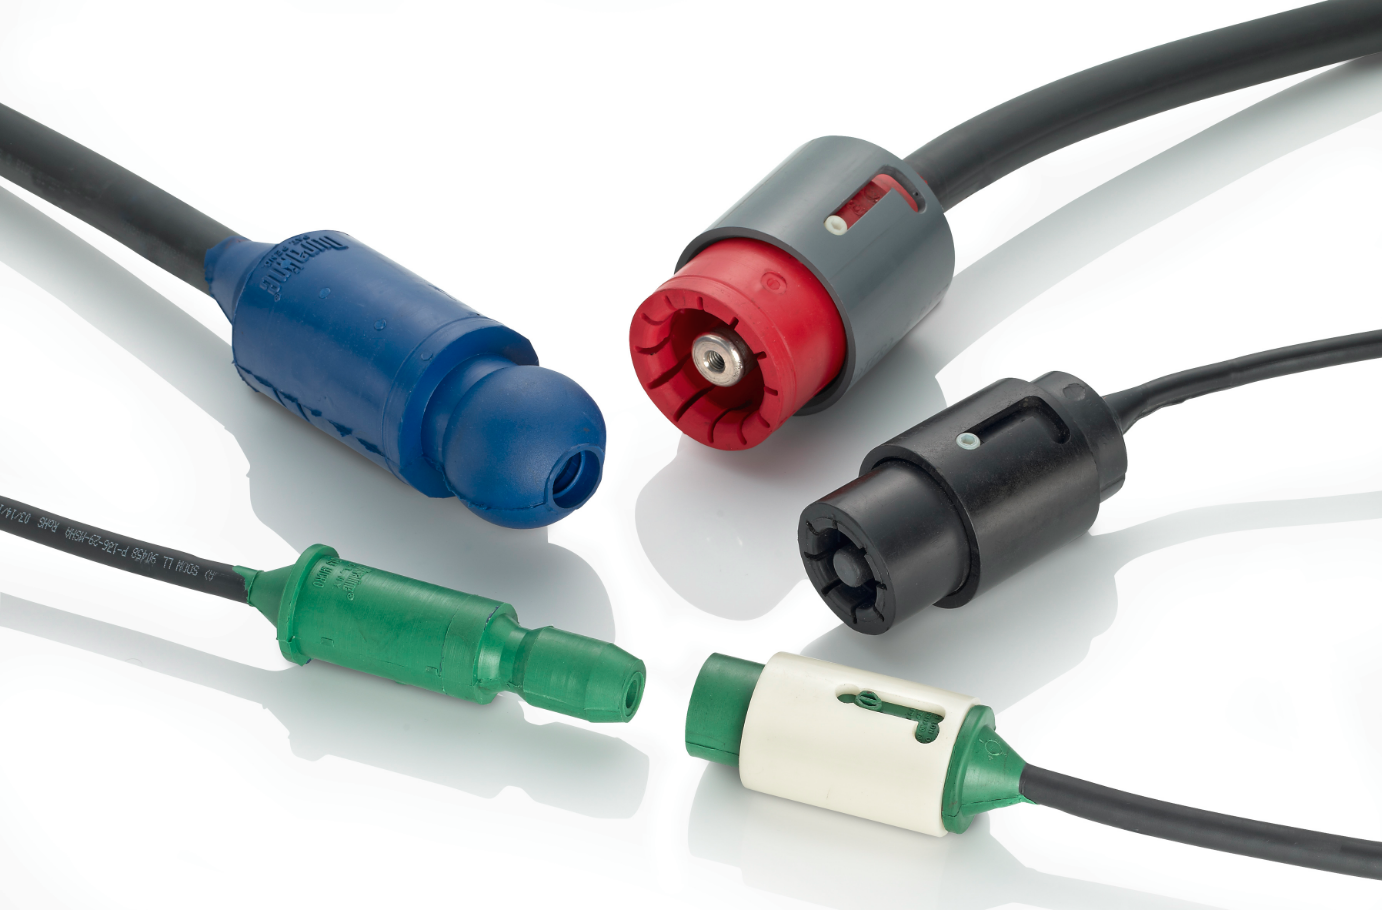 Power Connectors offer quick-connect properties.